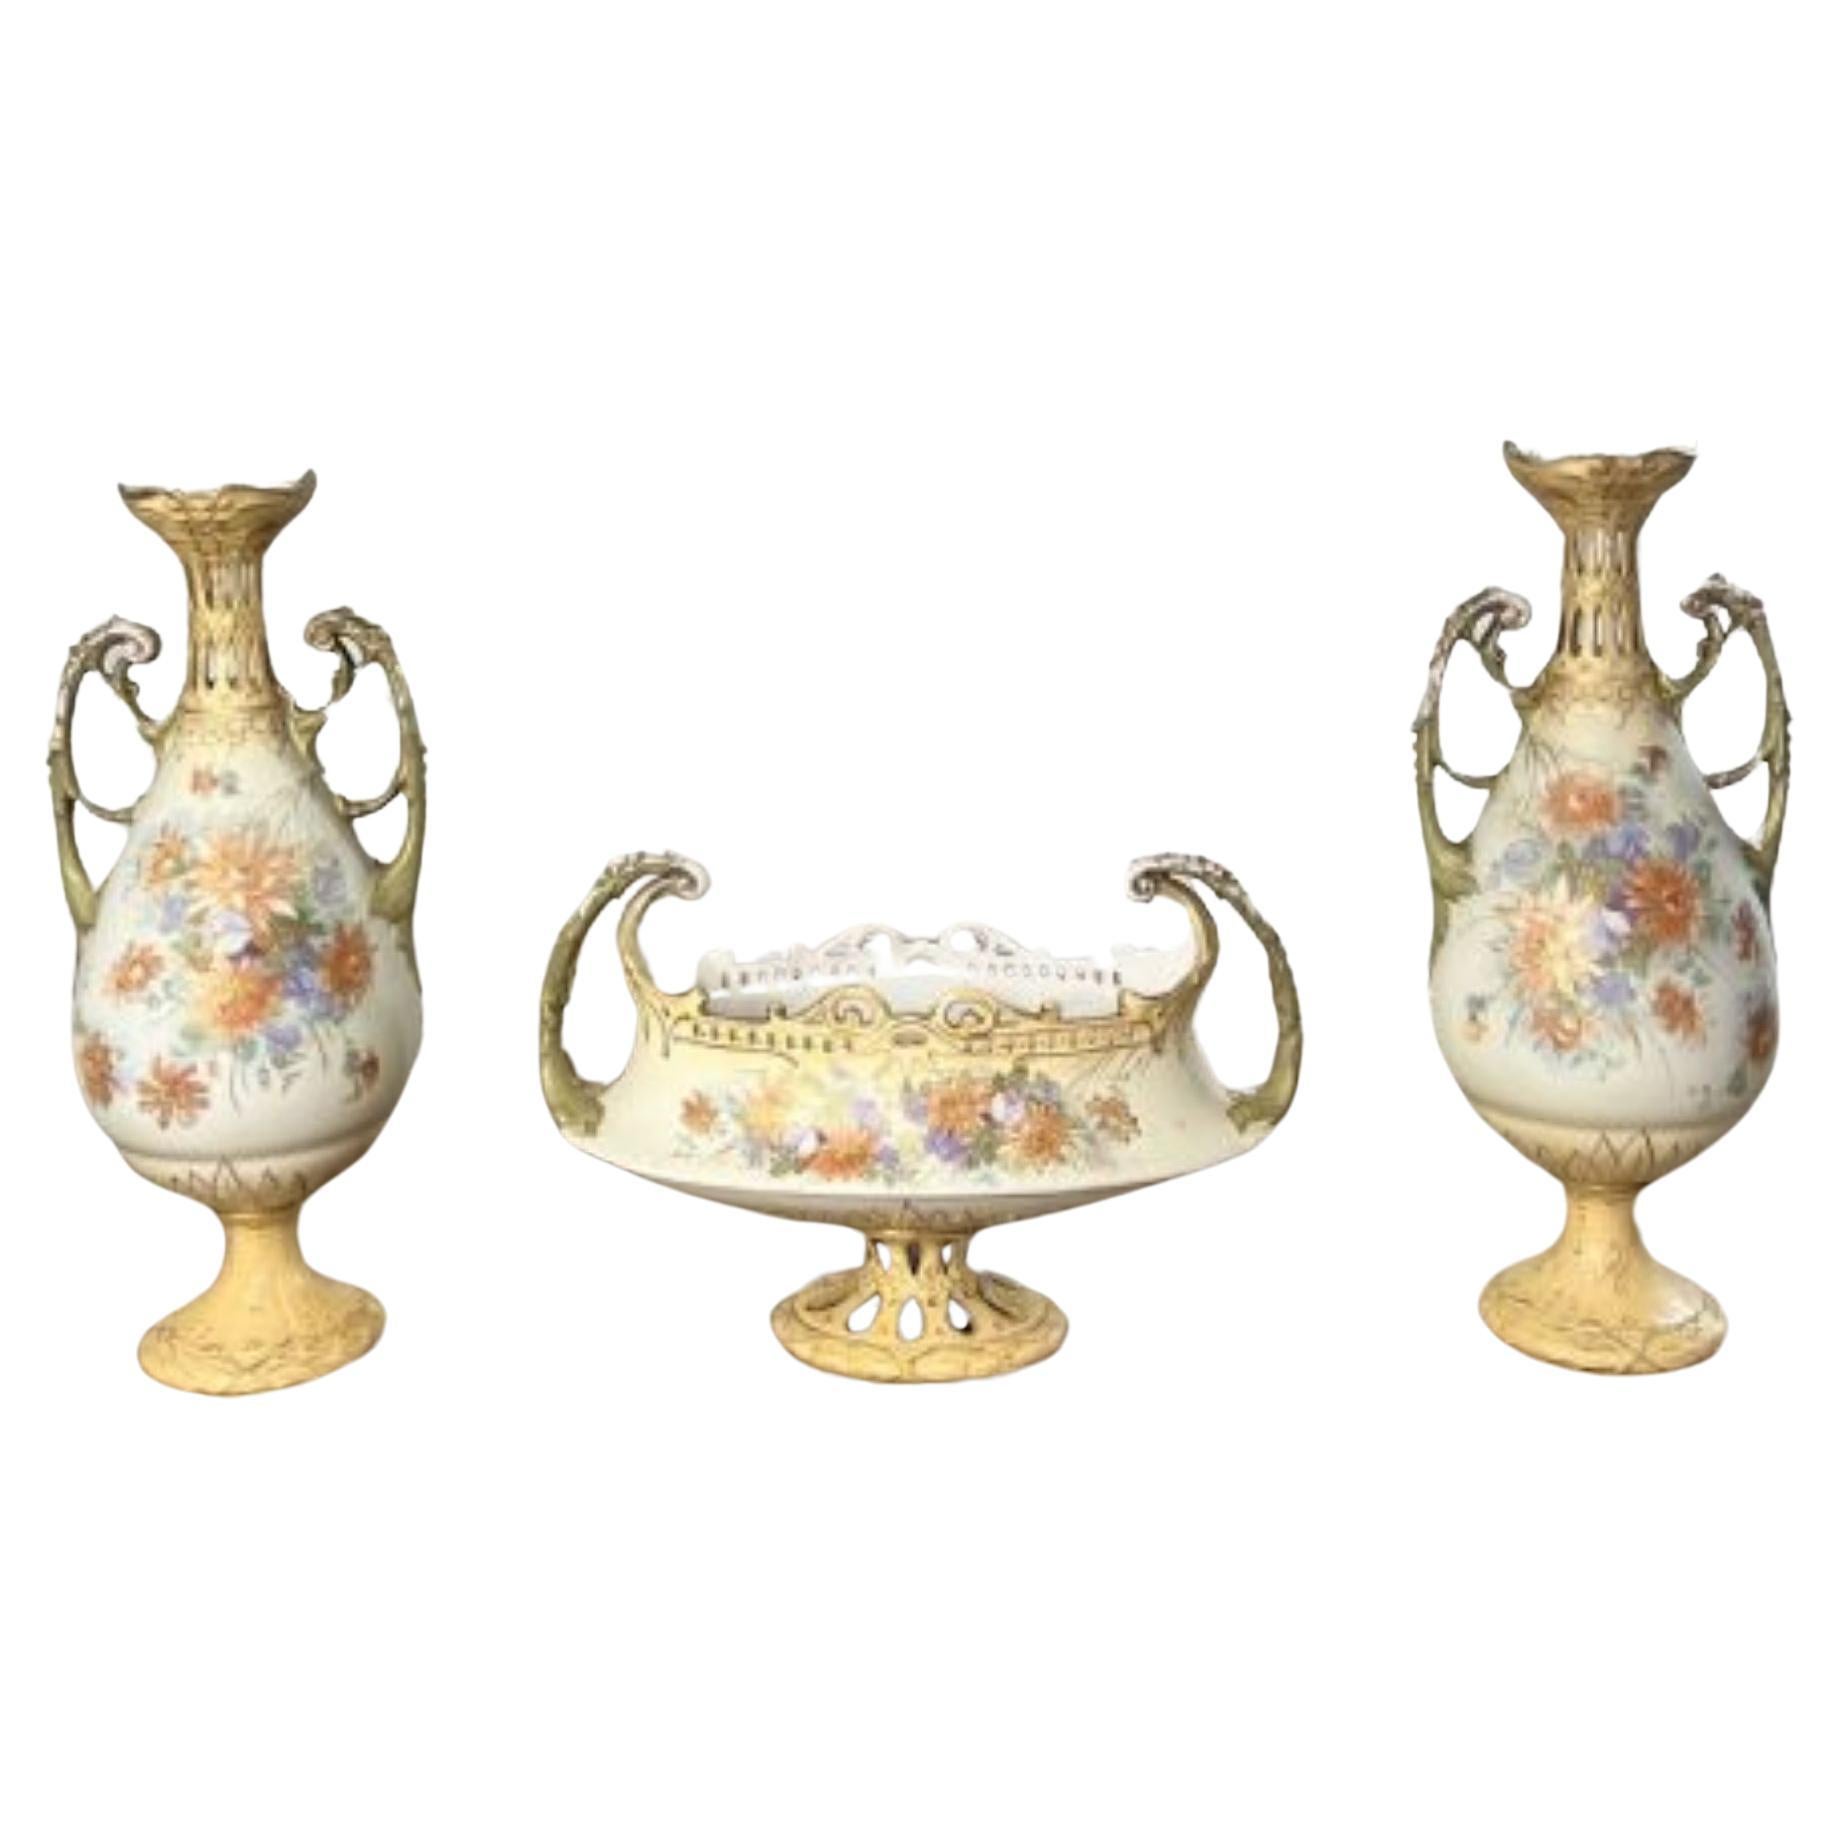 Outstanding quality antique Royal Vienna centrepiece and side vases 